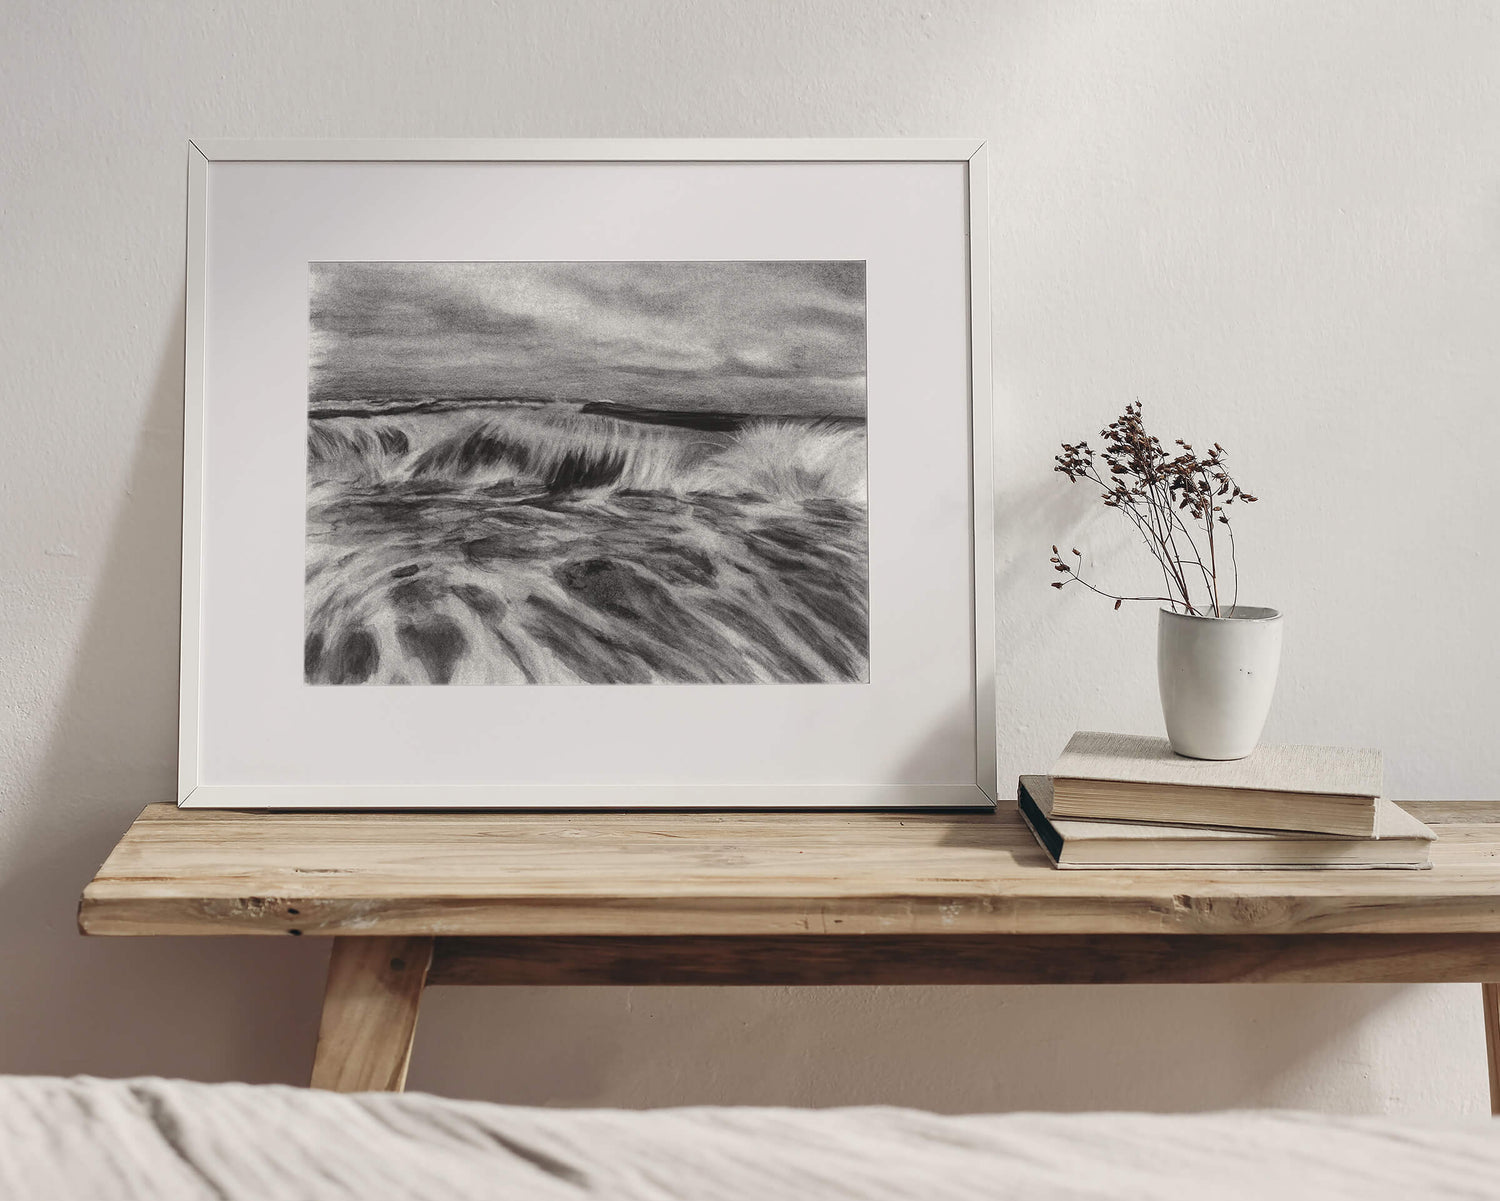 Original art, titled La Mar, hand-drawn with graphite and willow charcoal on fine art paper, by Australian artist, Hayley Byron. The drawing is a depiction of a wave in the ocean. This image features the artwork in-situ, in an interior bedroom.